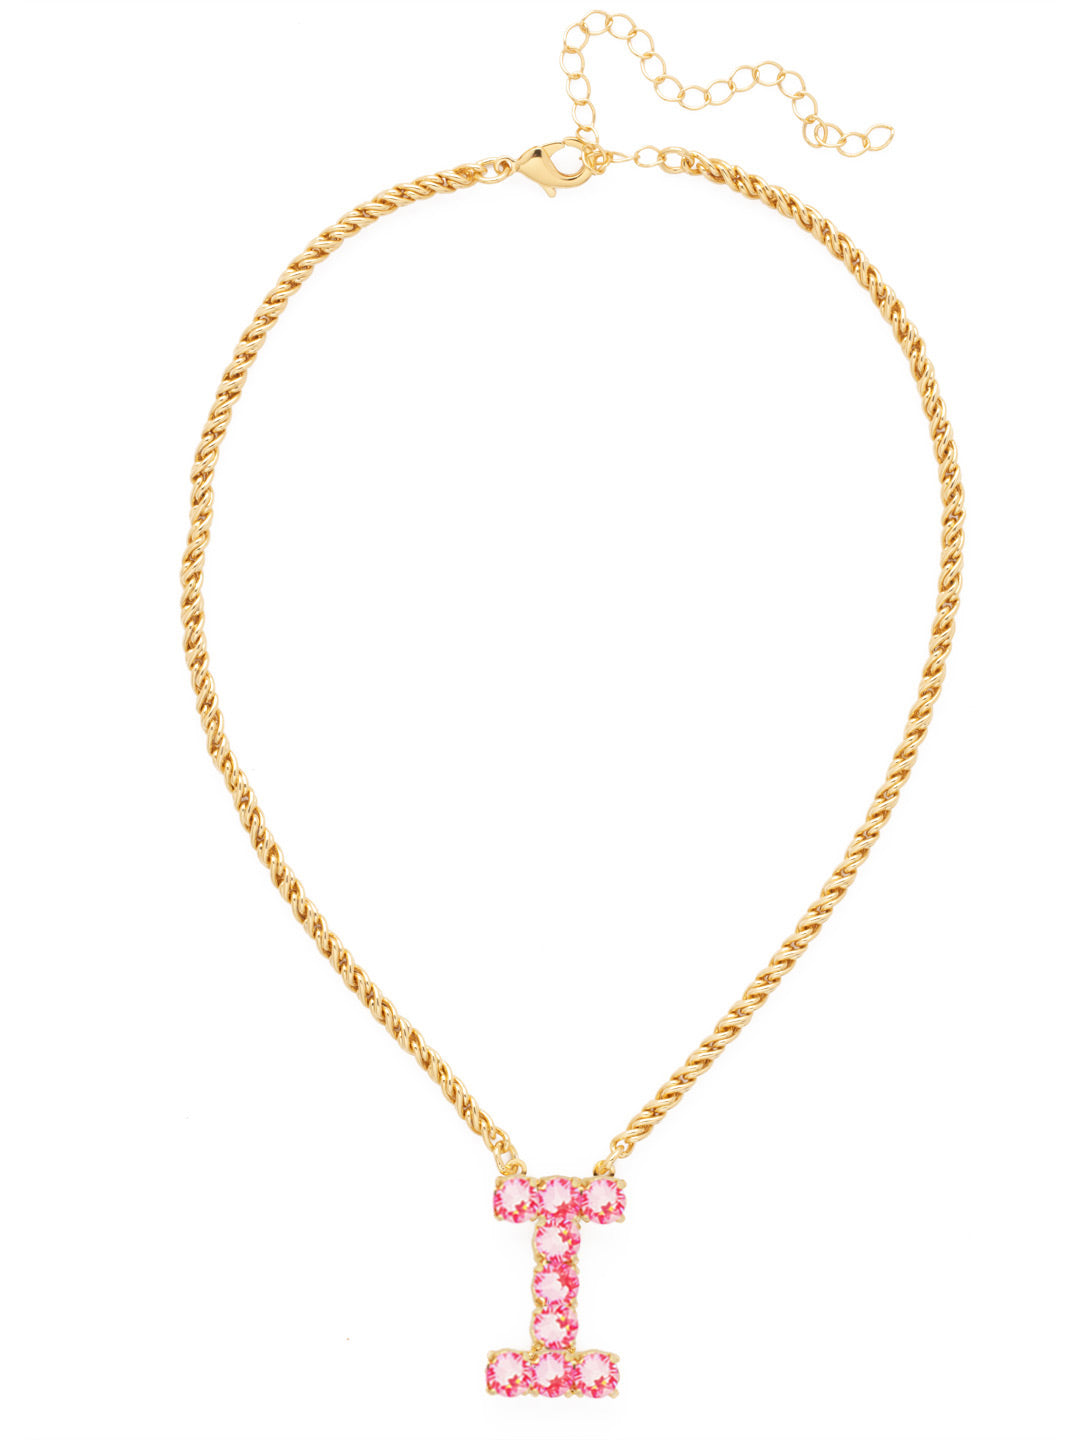 I Initial Rope Pendant Necklace - NFK28BGETP - <p>The Initial Rope Pendant Necklace features a crystal encrusted metal monogram pendant on an adjustable rope chain, secured with a lobster claw clasp. From Sorrelli's Electric Pink collection in our Bright Gold-tone finish.</p>